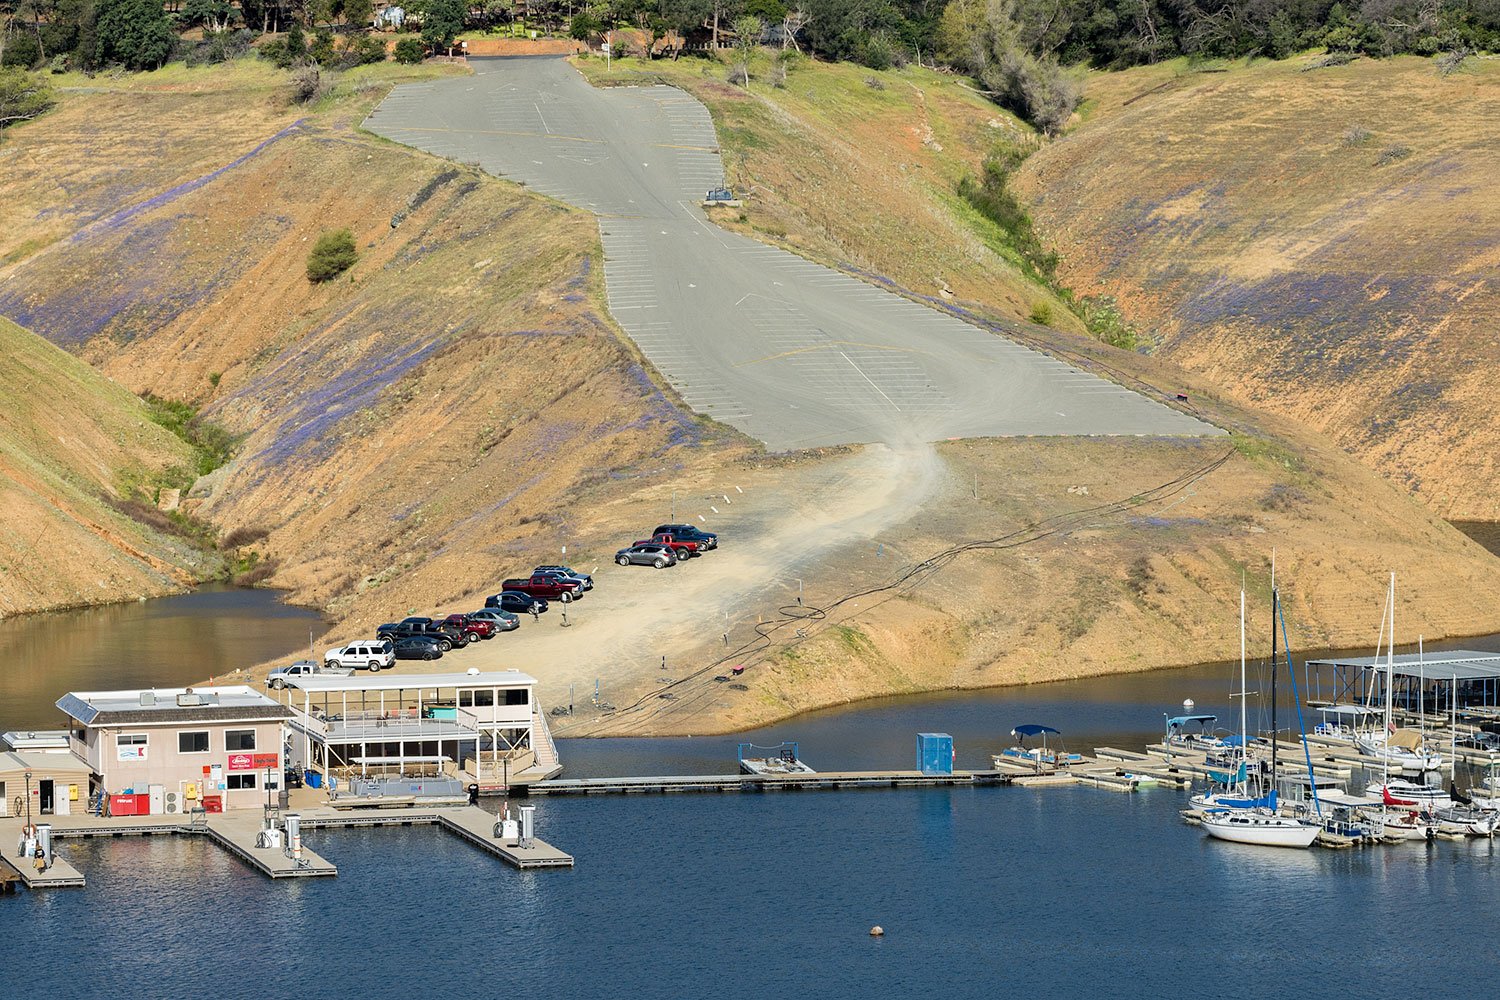 Extended Boat Ramp, Study #2. Lake Oroville Reservoir. Oroville, CA. 2022 (39°31'57.27" N 121°26'53.436" W)